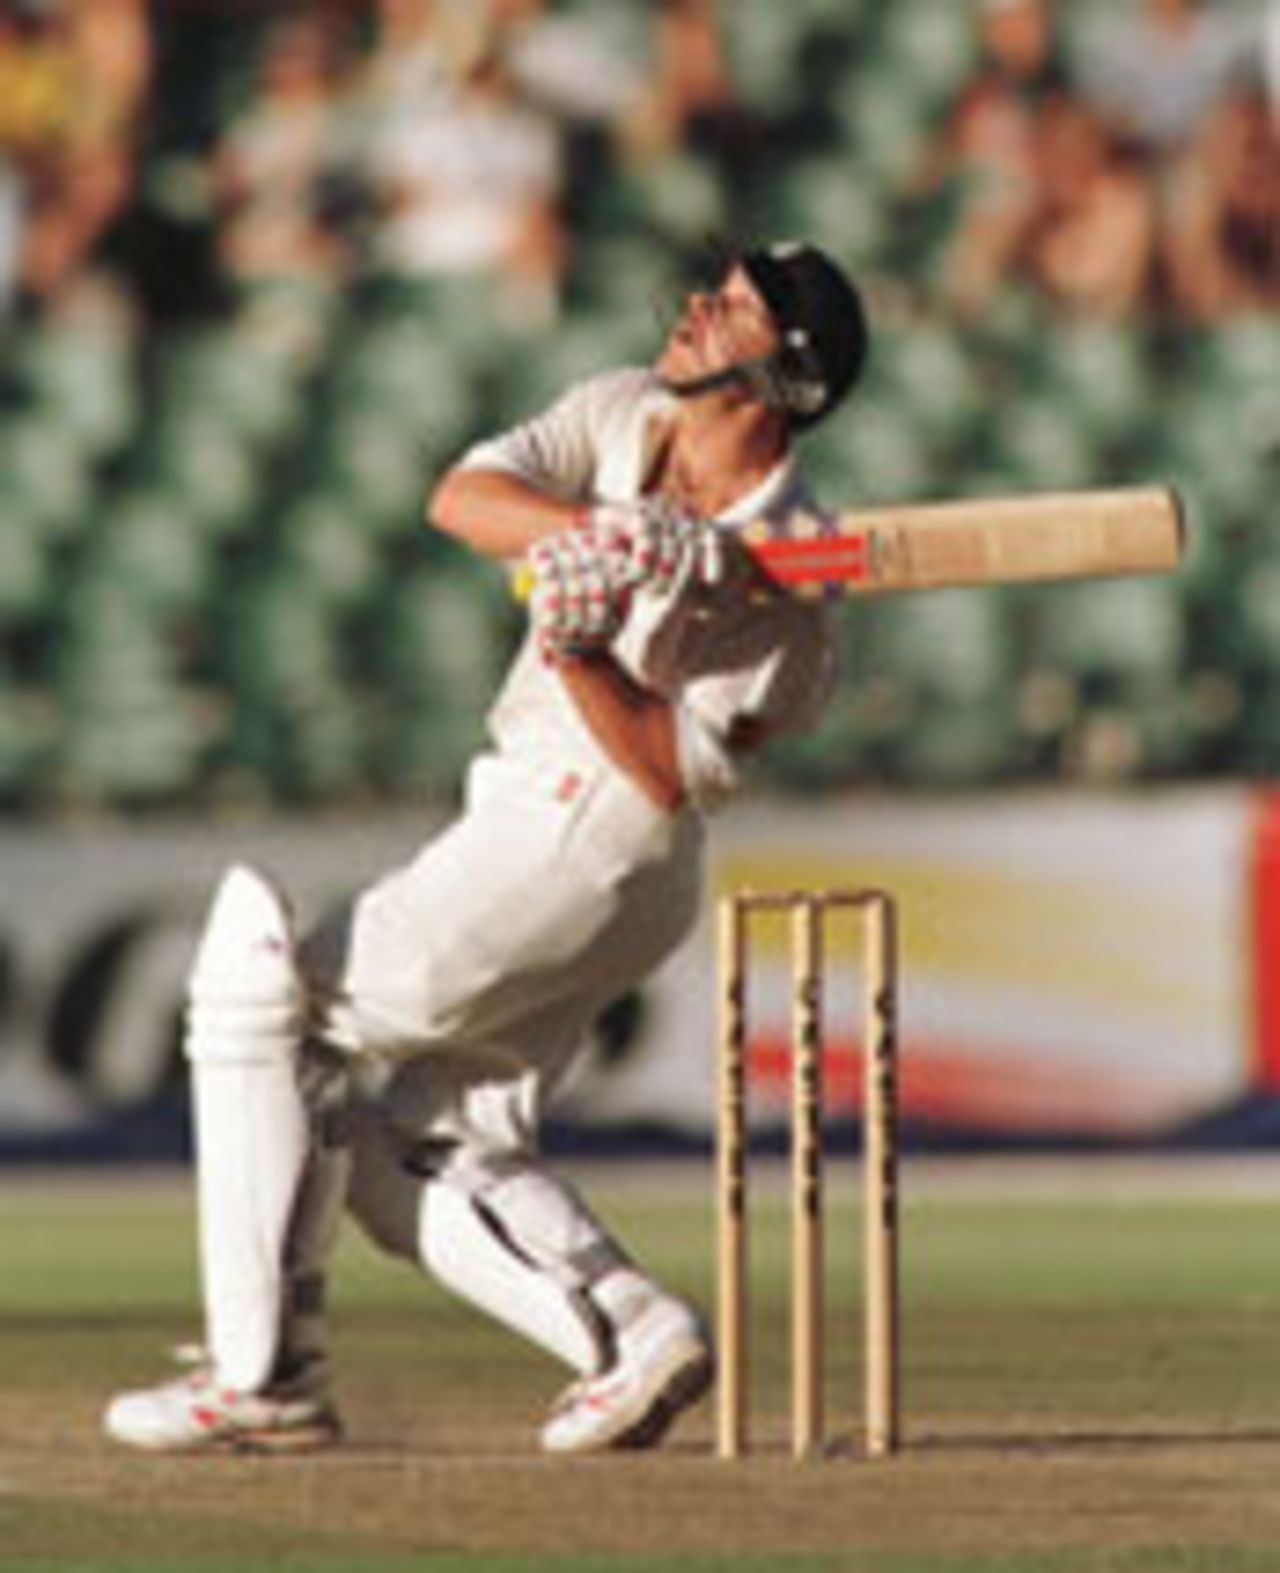 Robin Smith pulls on his way to 52, SA v Eng, 2nd Test, The Wanderers,  Dec 1, 1995